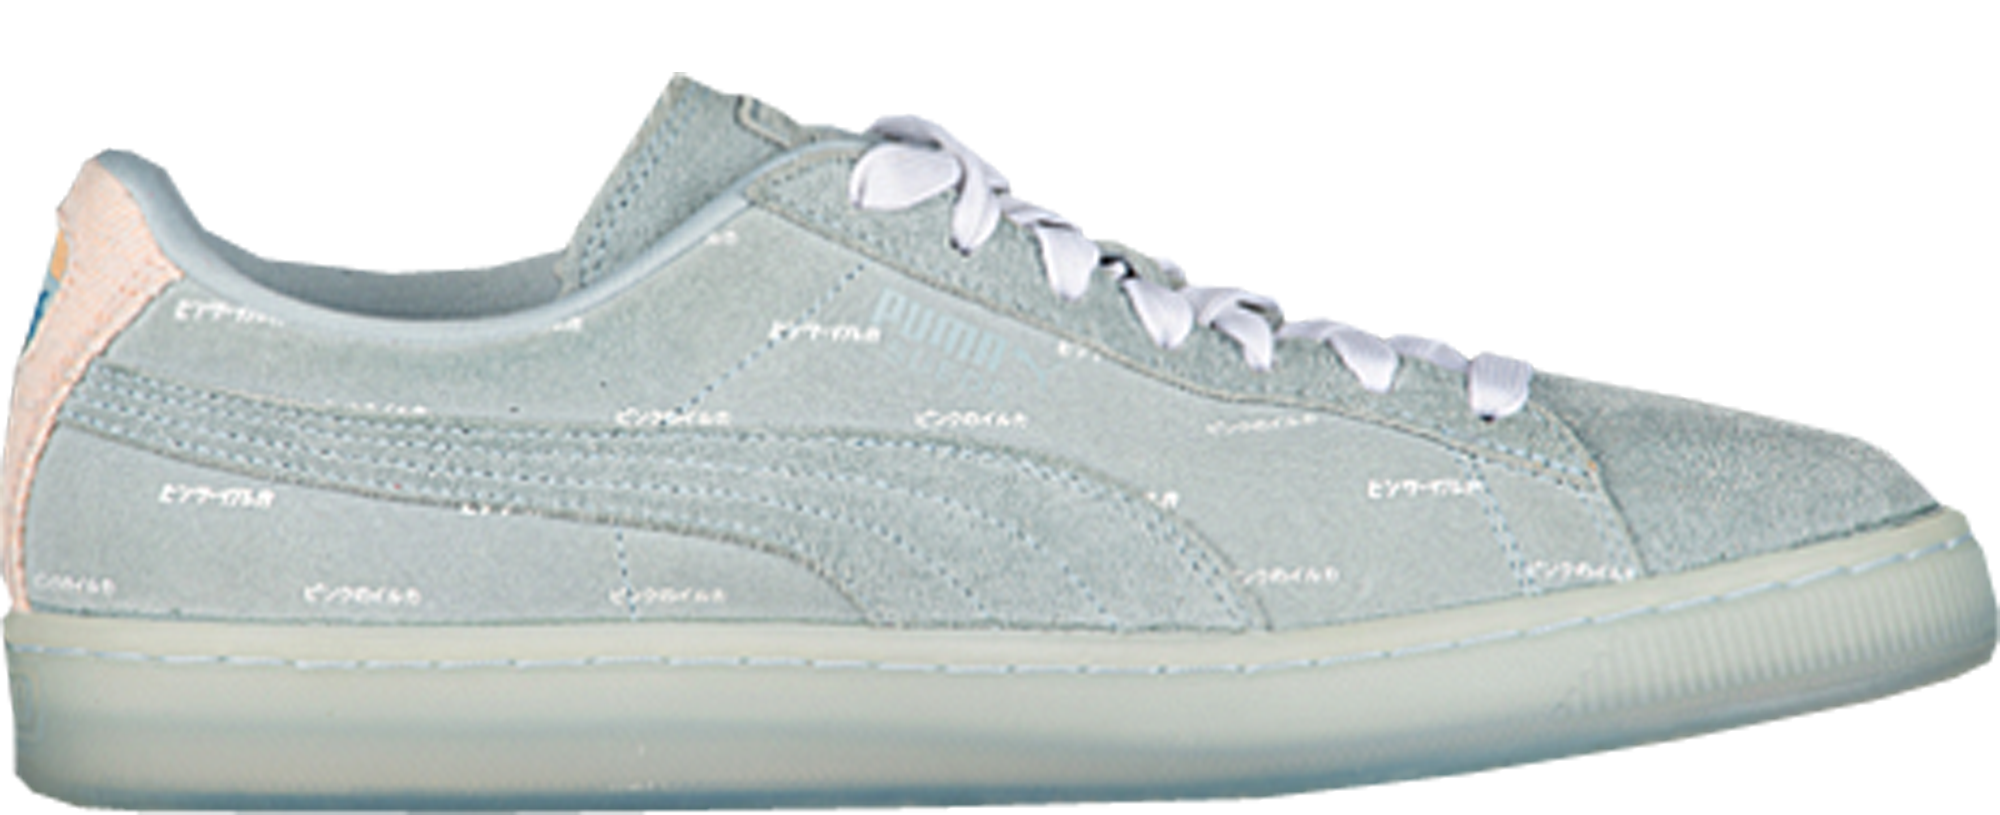 puma suede classic pink dolphin